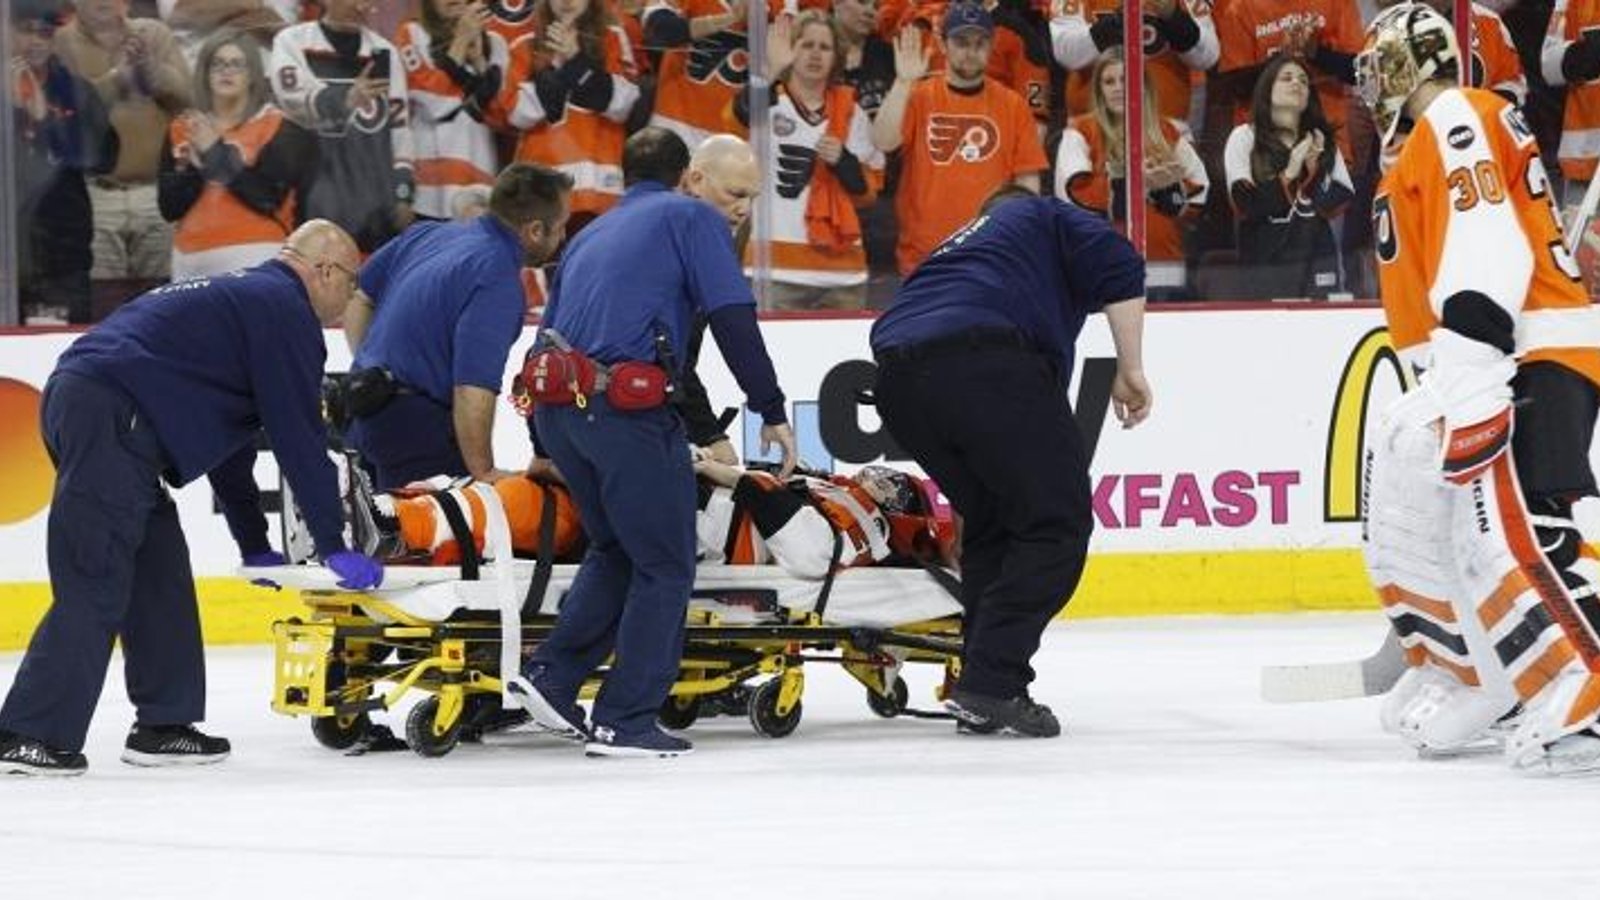 Some good news for Scott Laughton after being carted off on a stretcher last night.